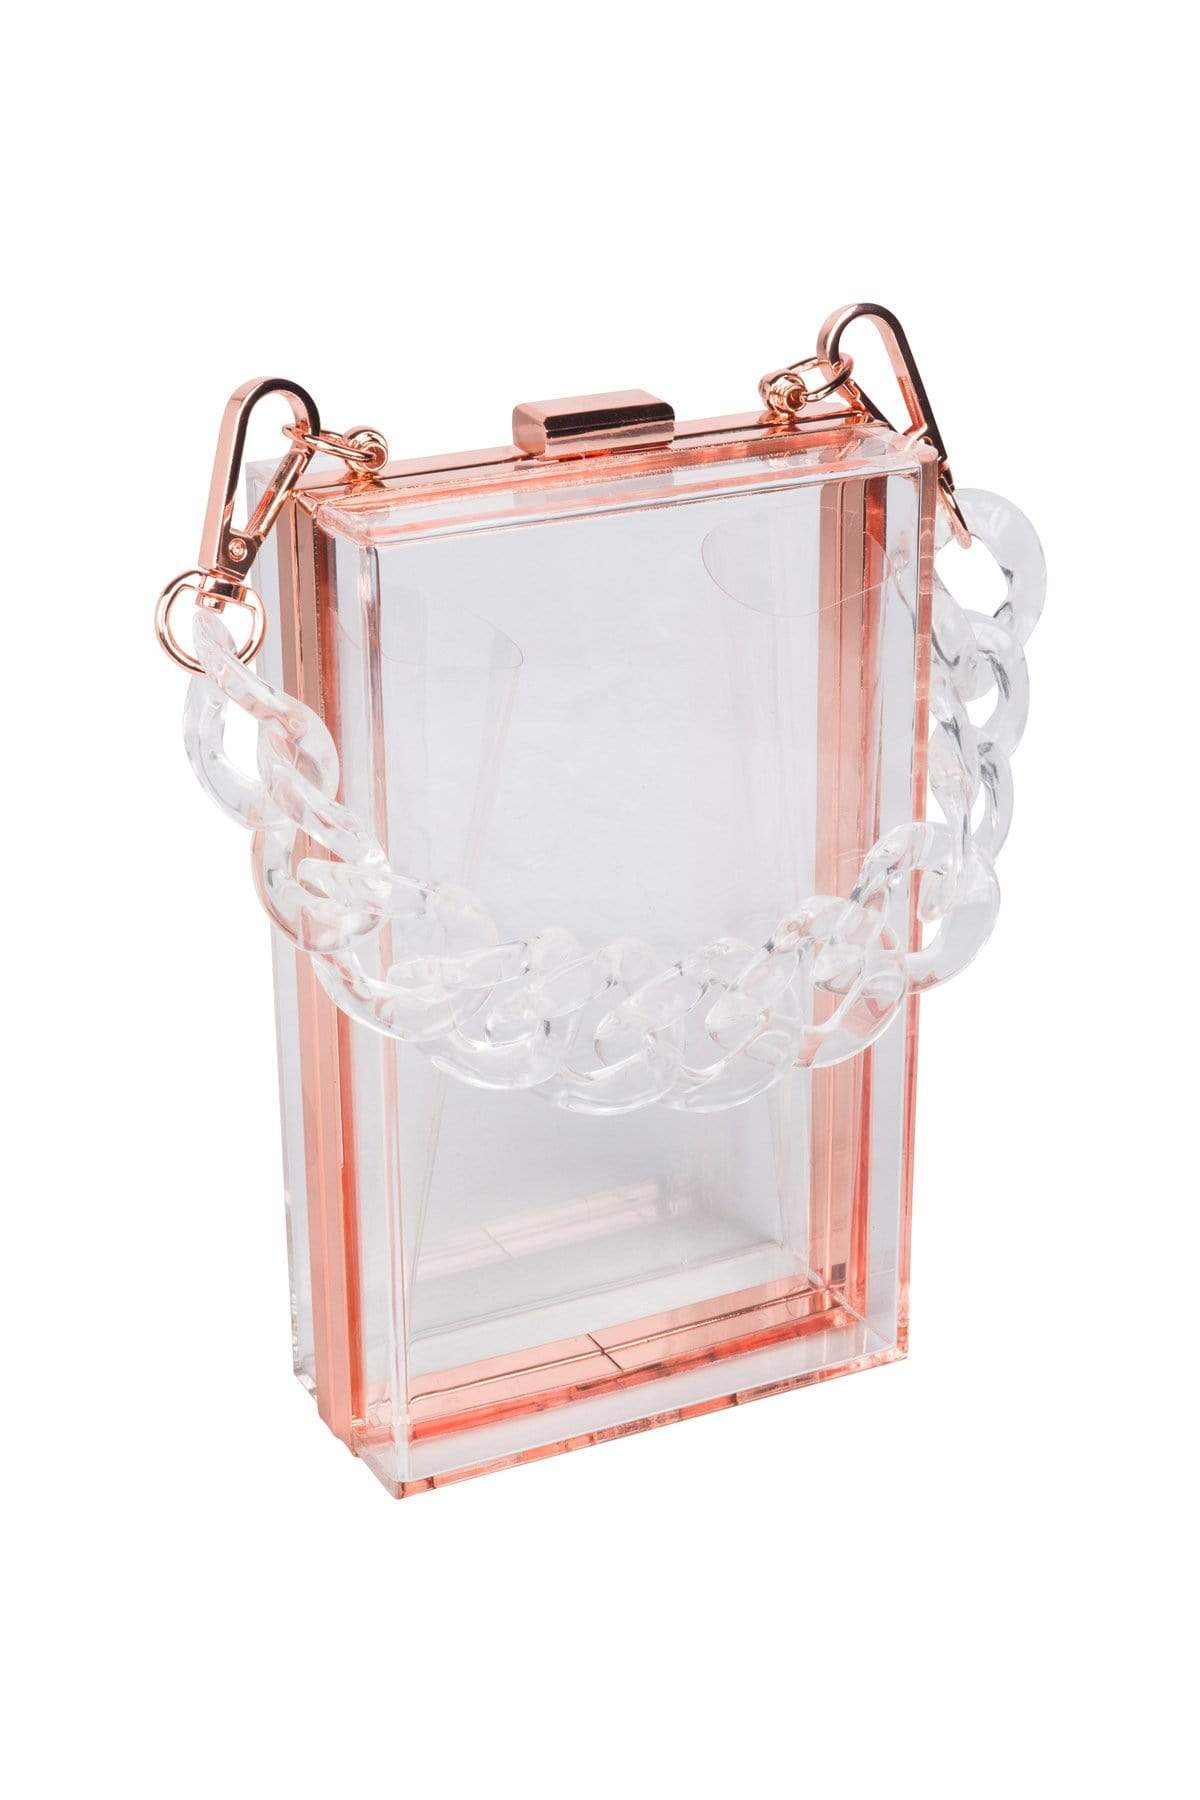 Luxury Dinner Bag, Evening Bag Glamorous, Elegant, Exquisite, Quiet Luxury  Women Clear Purse Acrylic Clear Clutch Bag, Shoulder Handbag With Removable  Gold Chain Strap Square Bag, Metal Chain For Lady, Woman, For